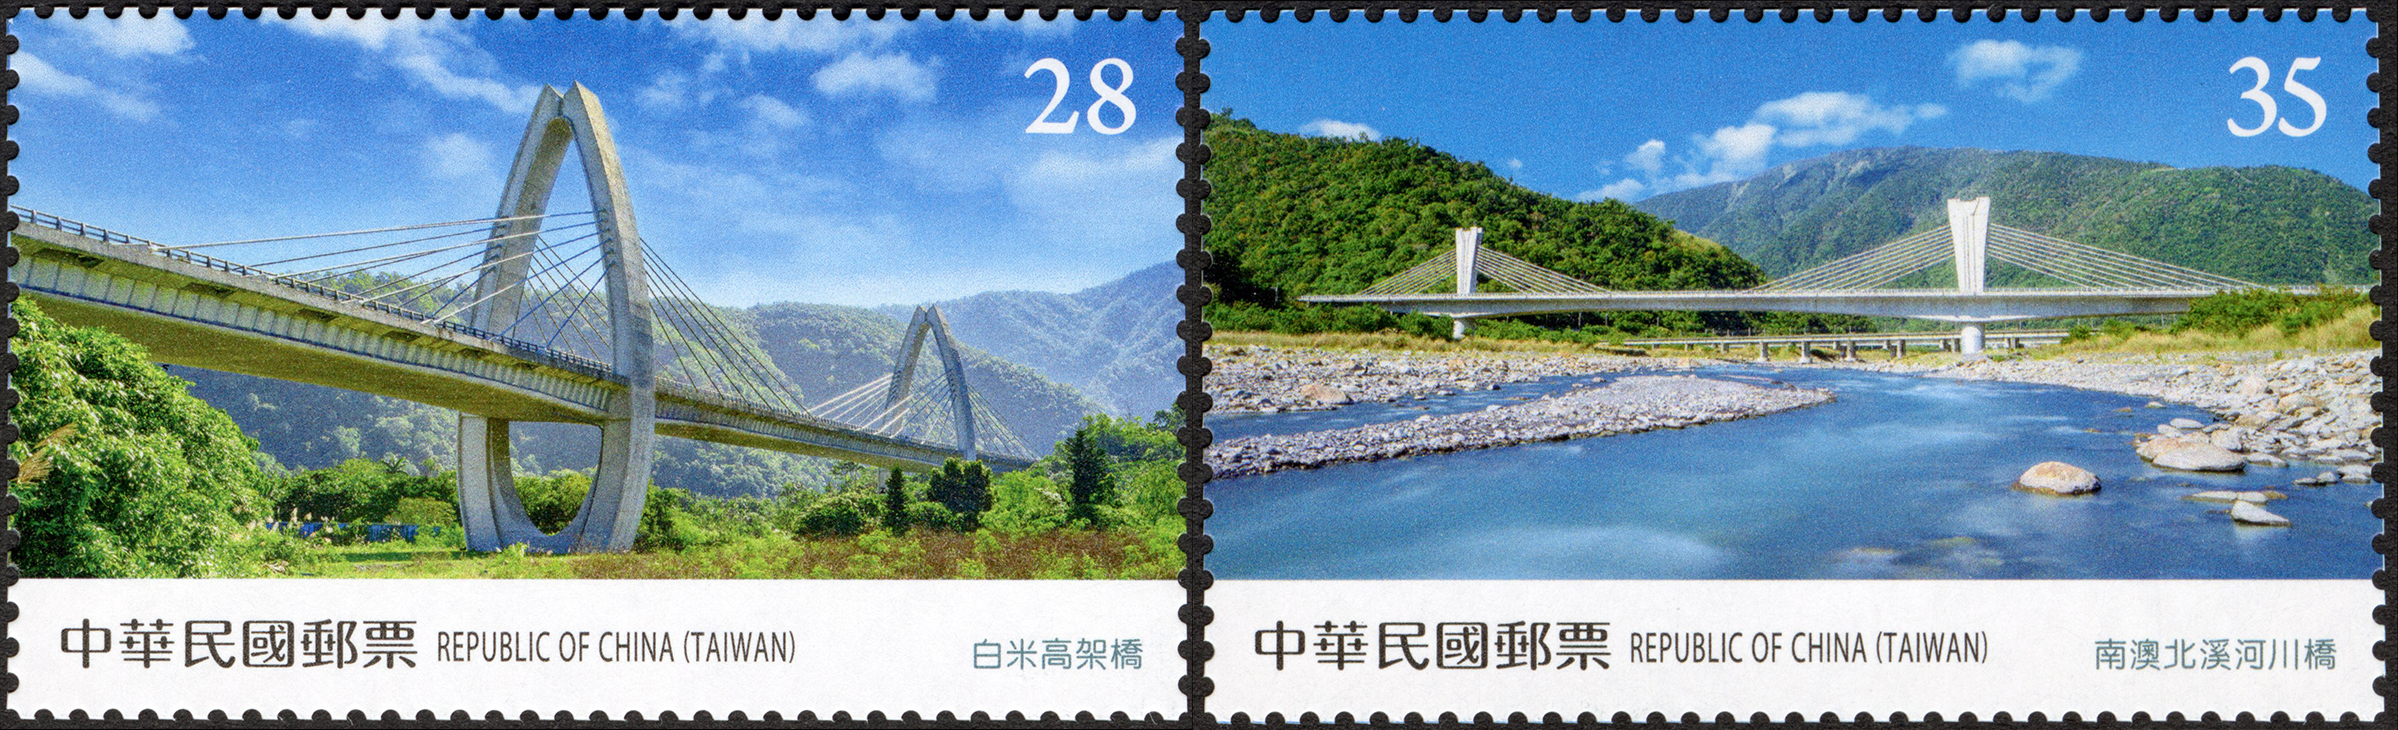 Completion of the Suhua Highway Improvement Project Postage Stamps